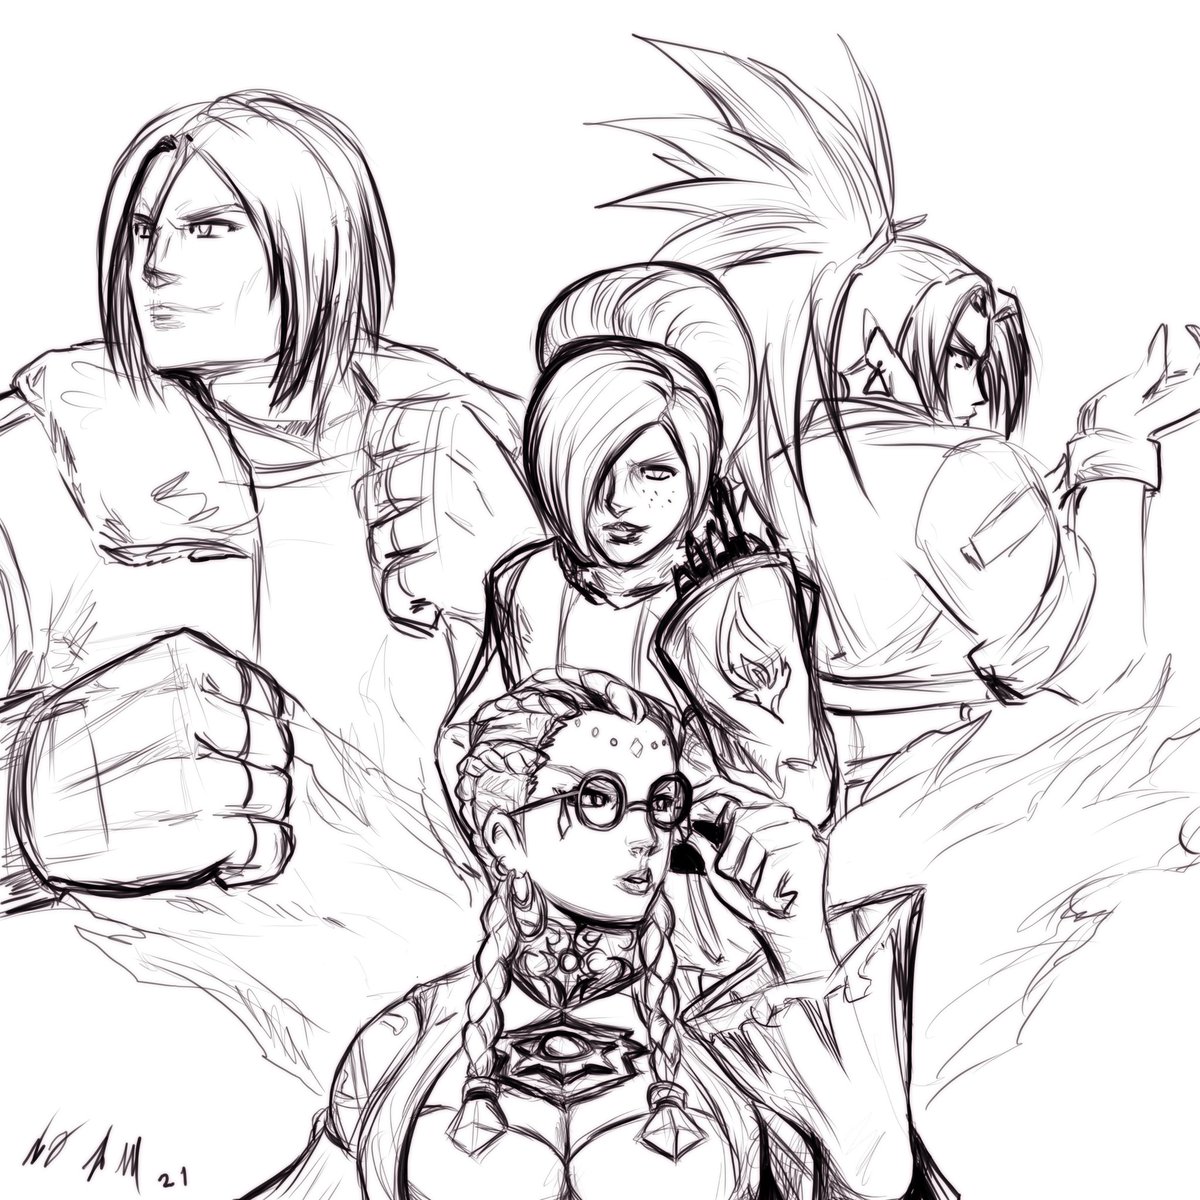 KOF 15 HYPE SAUCE.... ROLLBACK NETCODE!!! GOOD GAWD, I so many questions, the main one is who is the black woman with glasses? My Expectations have been shattered. Happy anniversary KOF.
#drawing #artwork #kofxv #kof15 #snk #terrybogard #ashcrimson #leonakof